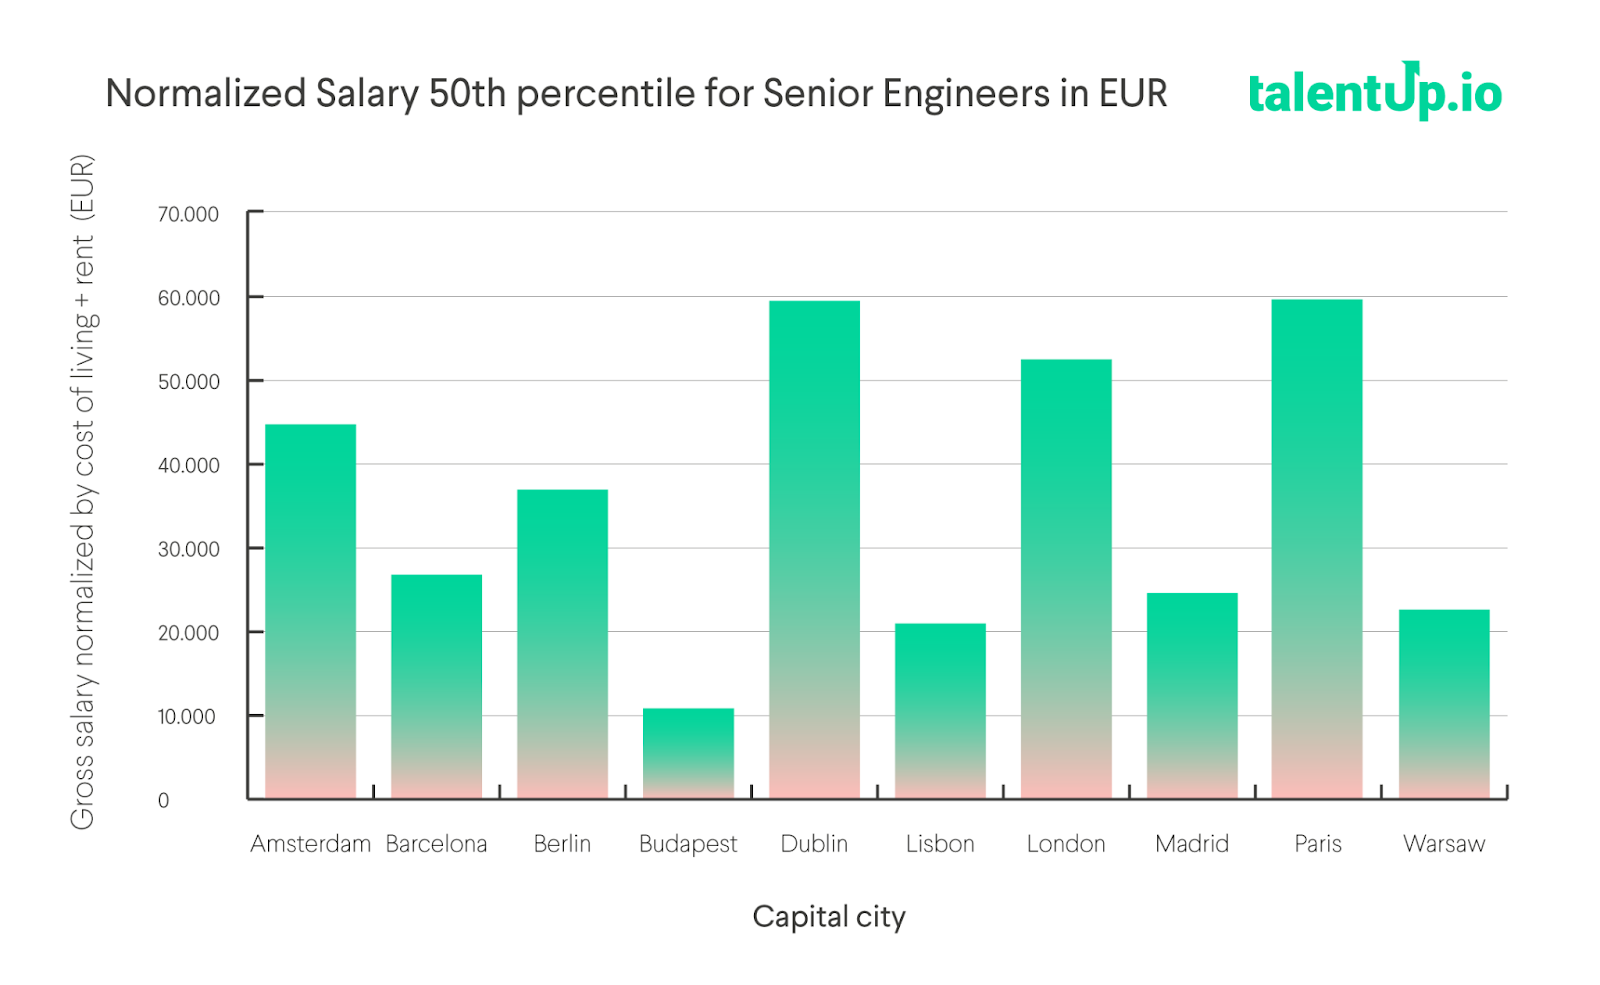 Normalized Salaries 50th percentile for Senior Engineers in EUR.